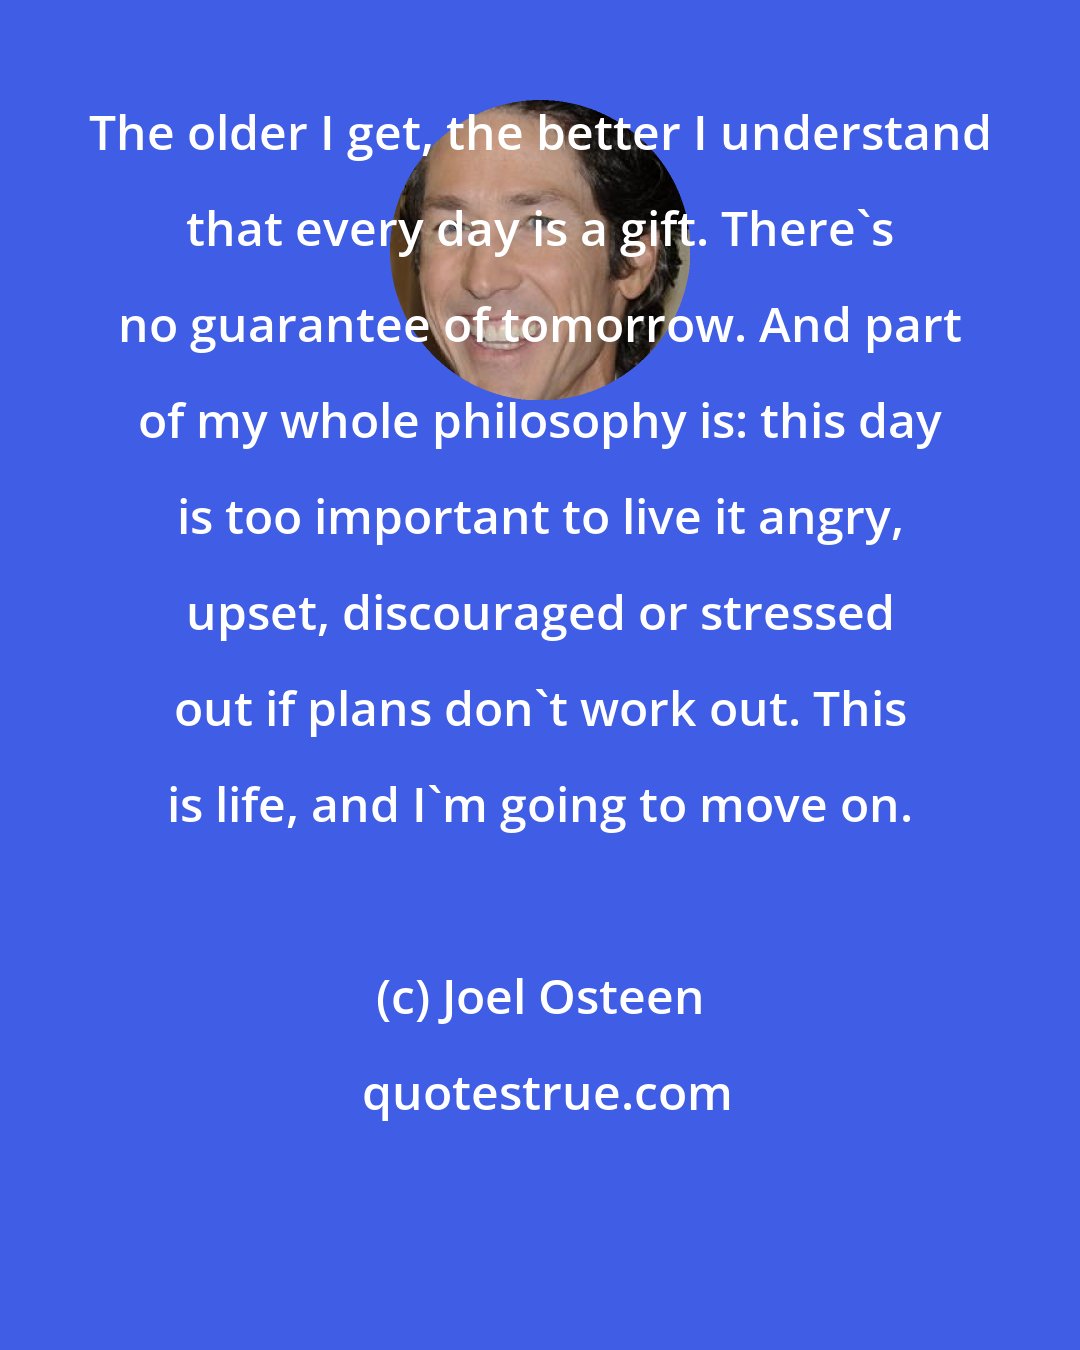 Joel Osteen: The older I get, the better I understand that every day is a gift. There's no guarantee of tomorrow. And part of my whole philosophy is: this day is too important to live it angry, upset, discouraged or stressed out if plans don't work out. This is life, and I'm going to move on.